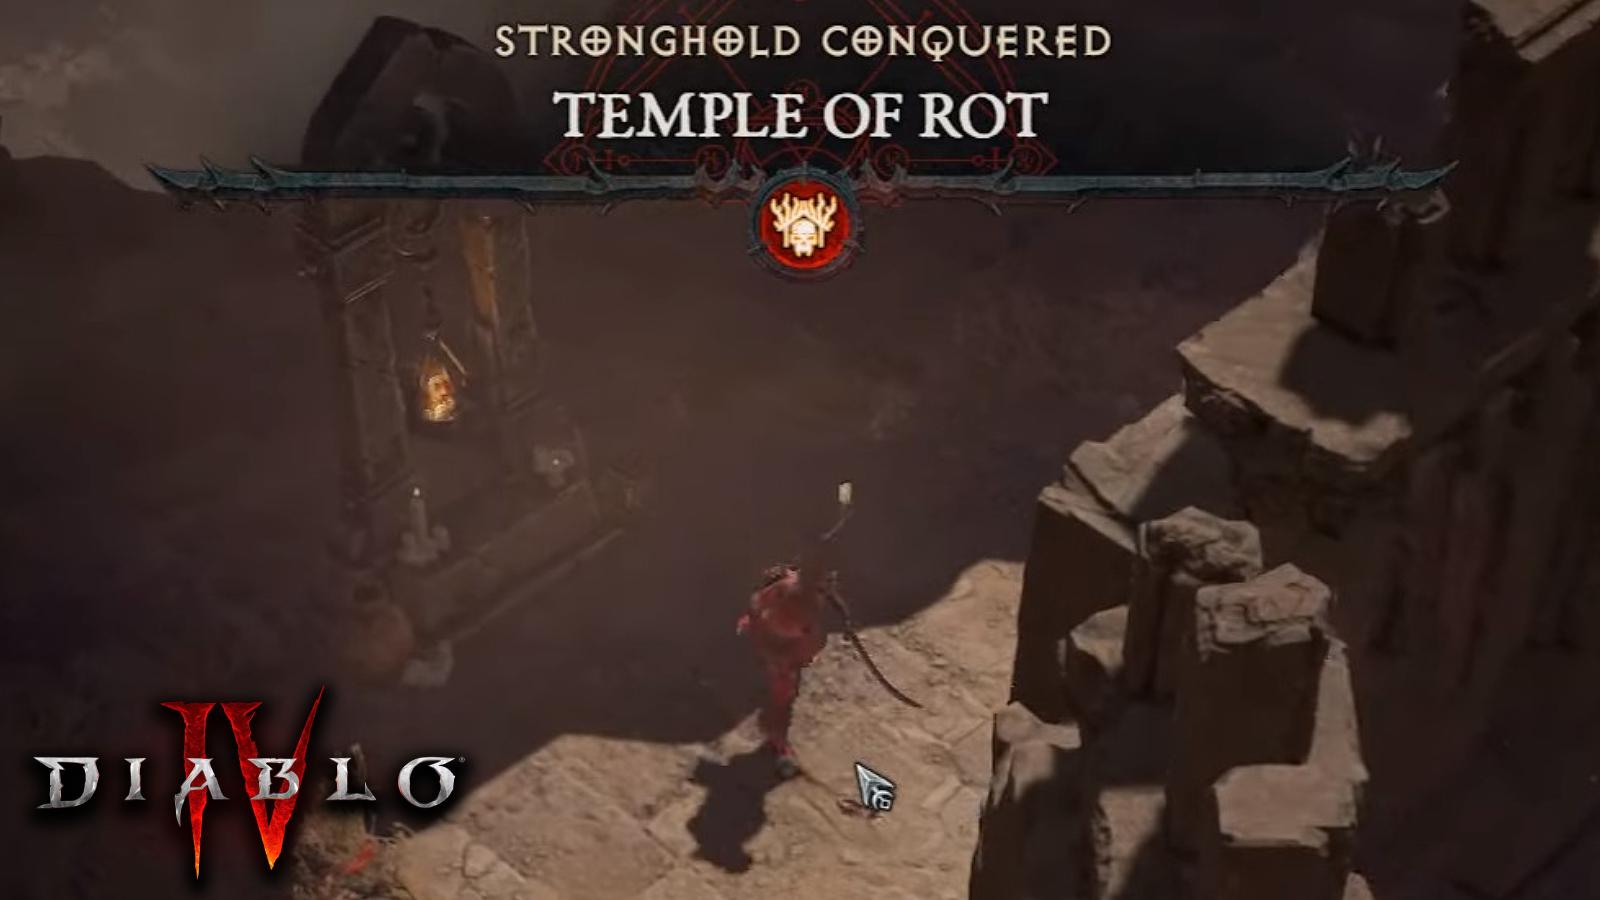 an image of the Temple of Rot Stronghold in Diablo 4